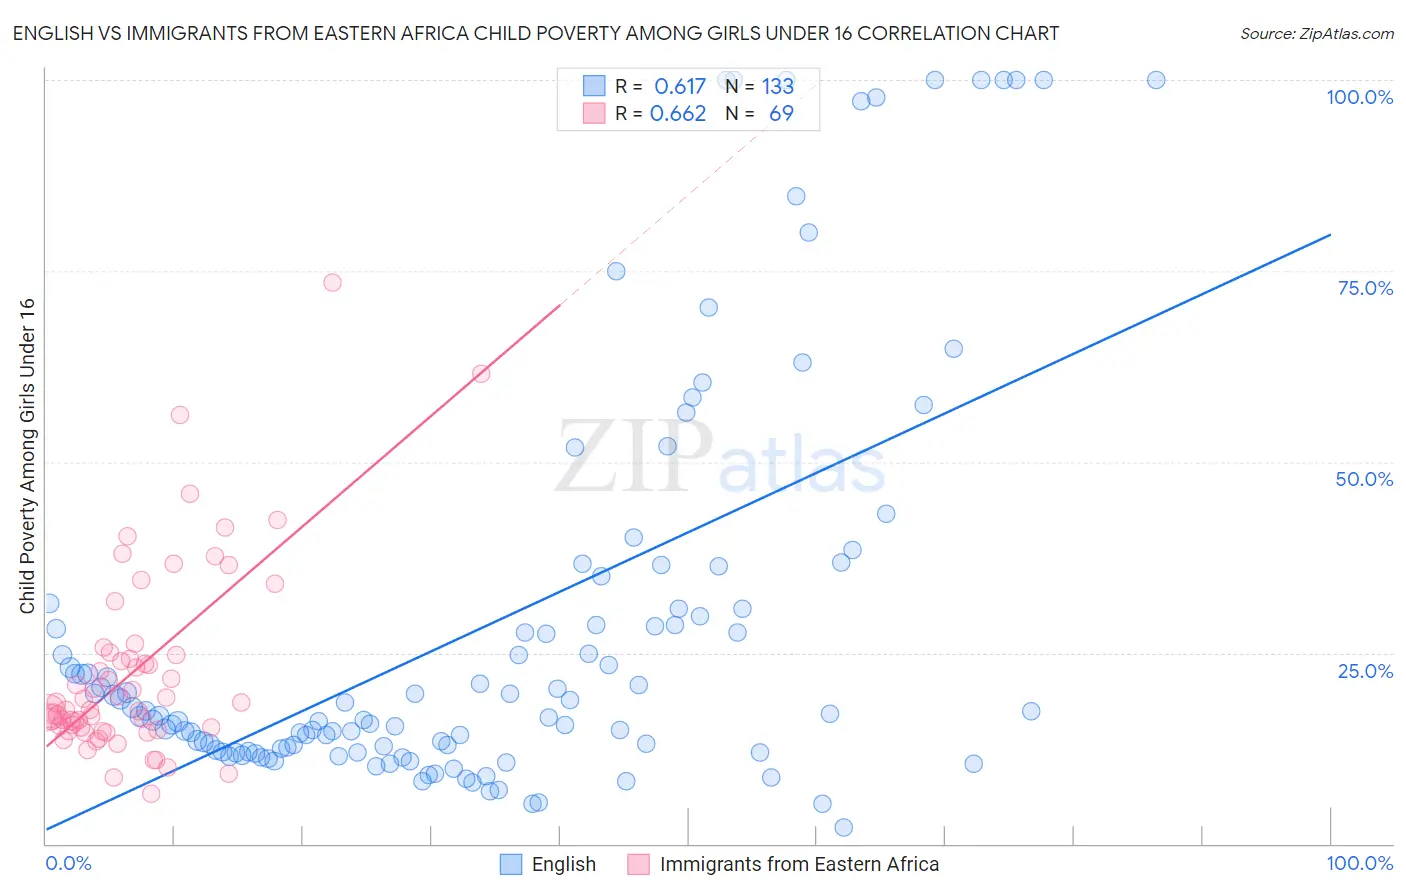 English vs Immigrants from Eastern Africa Child Poverty Among Girls Under 16